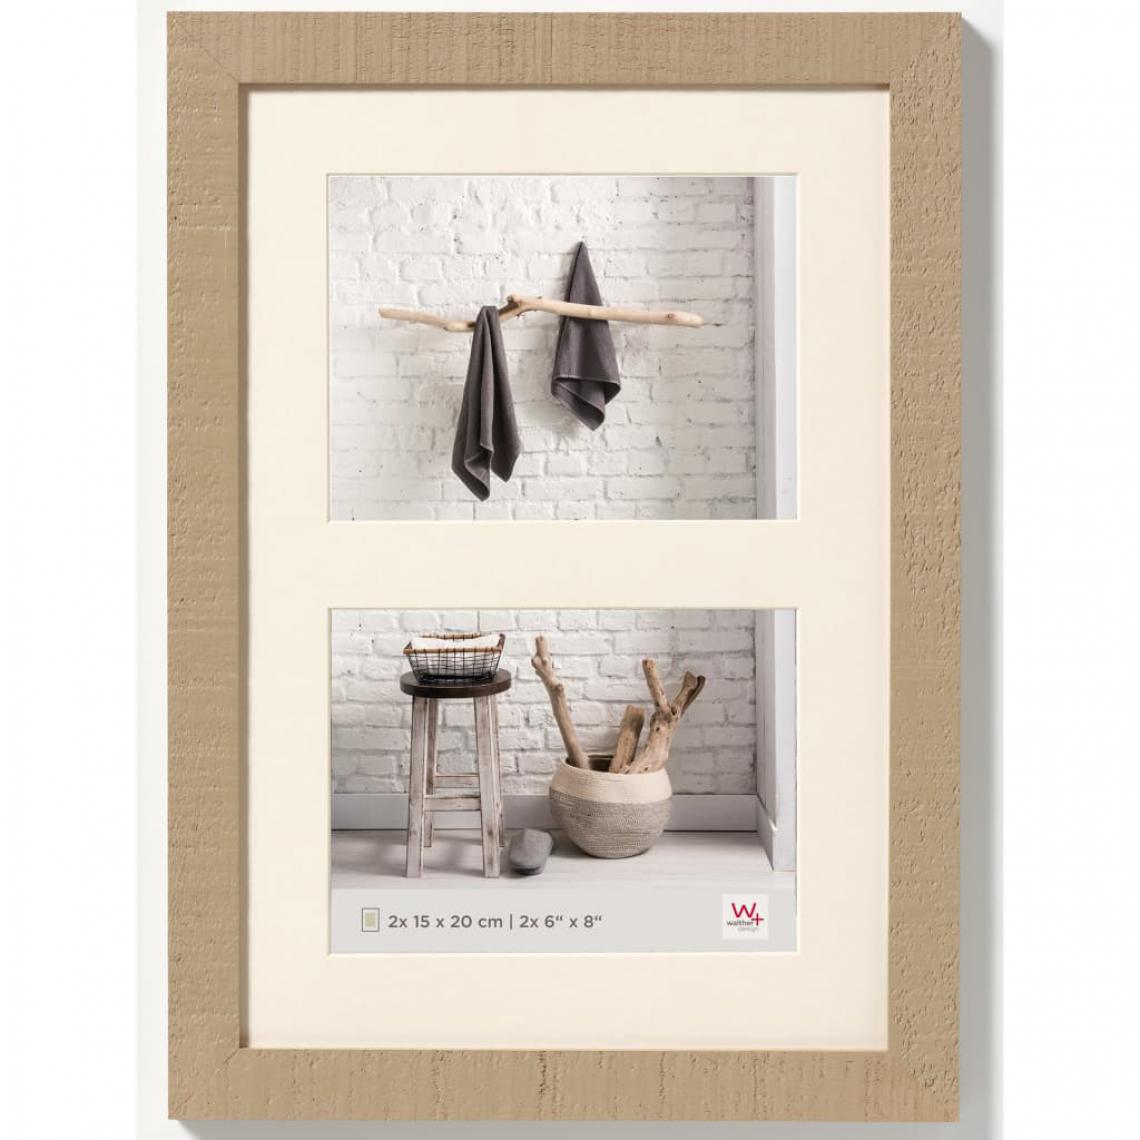 Walther - Walther Design Cadre photo Home 2x15x20 cm Marron - Cadres, pêle-mêle